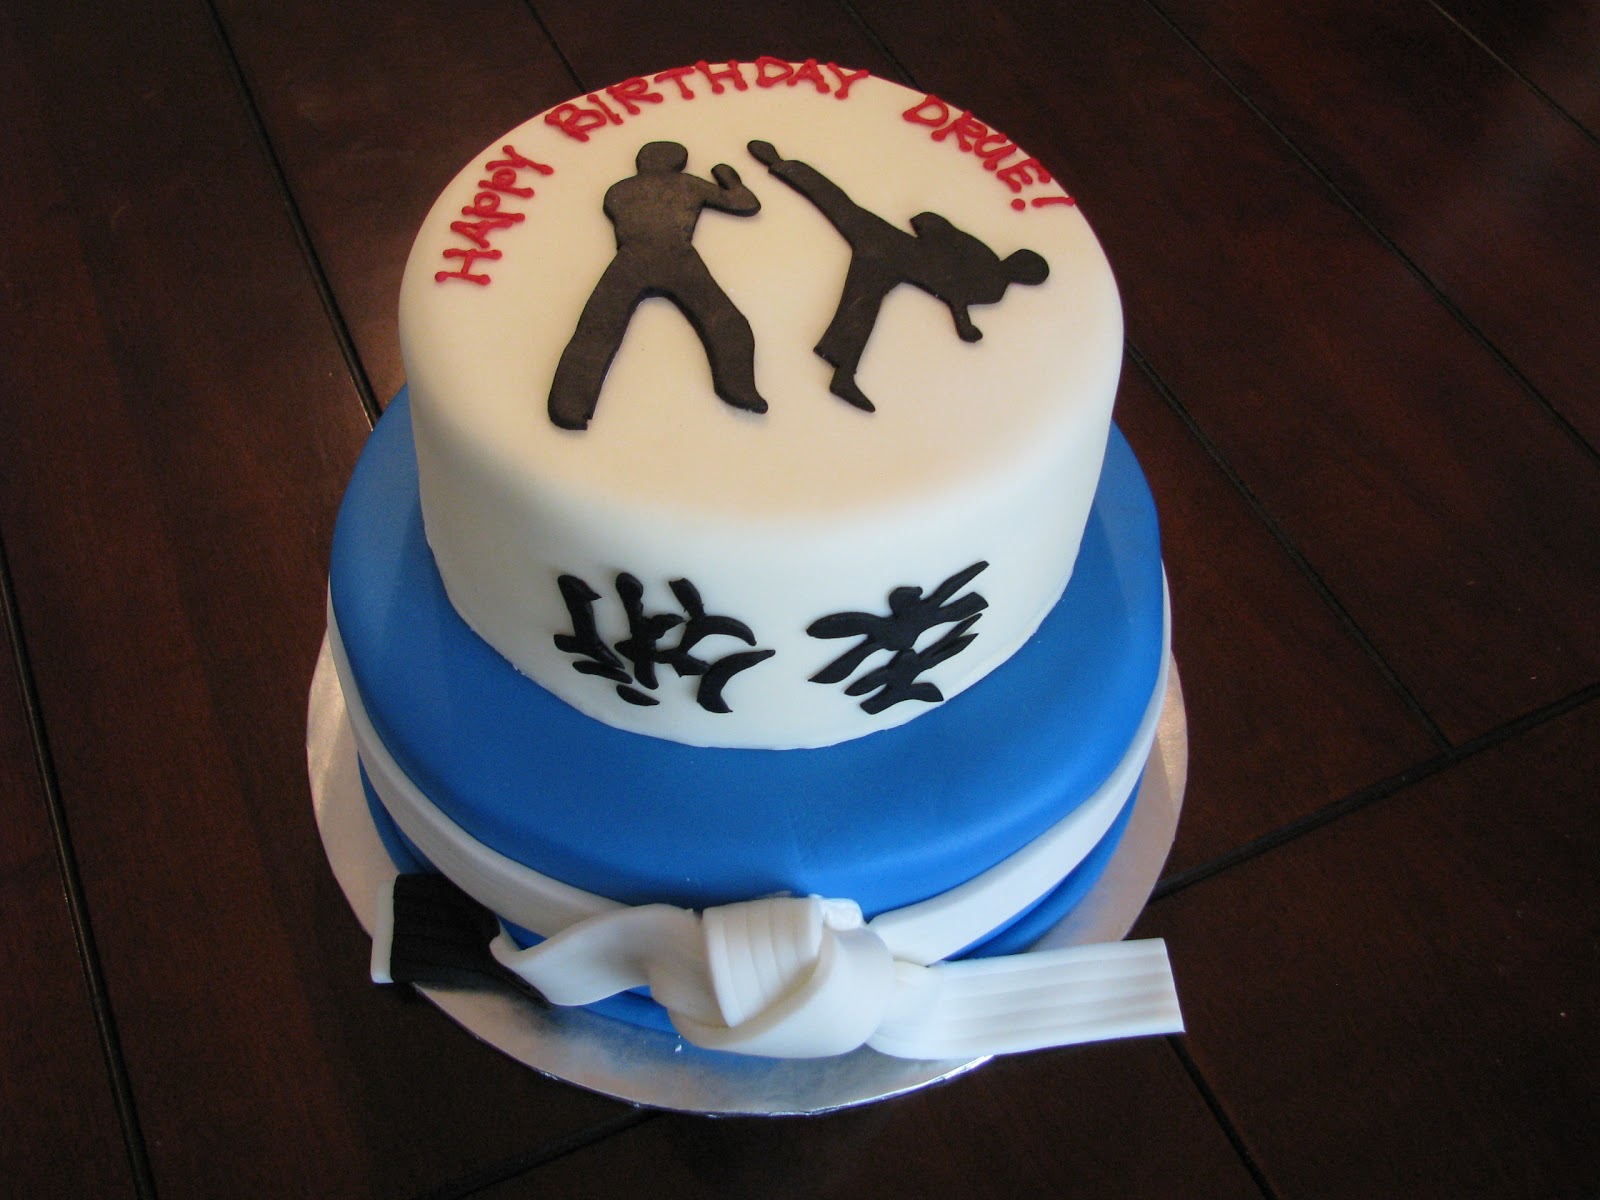 Karate Cakes Cake Ideas and Designs. 